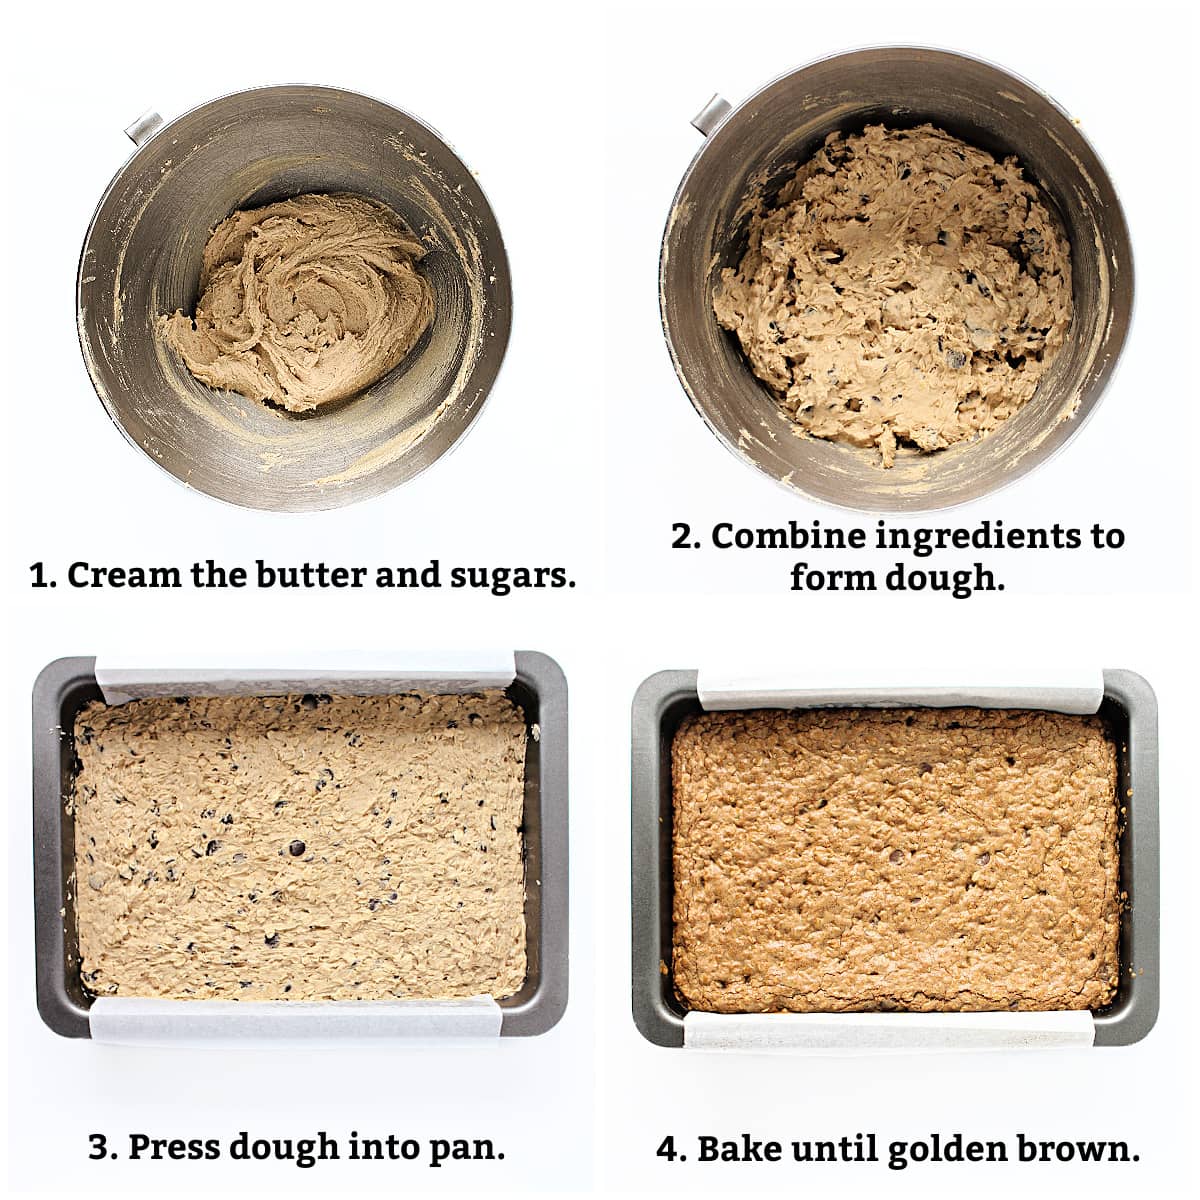 Instructions: cream butter and sugars, combine all ingredients to form dough, press into pan, bake.